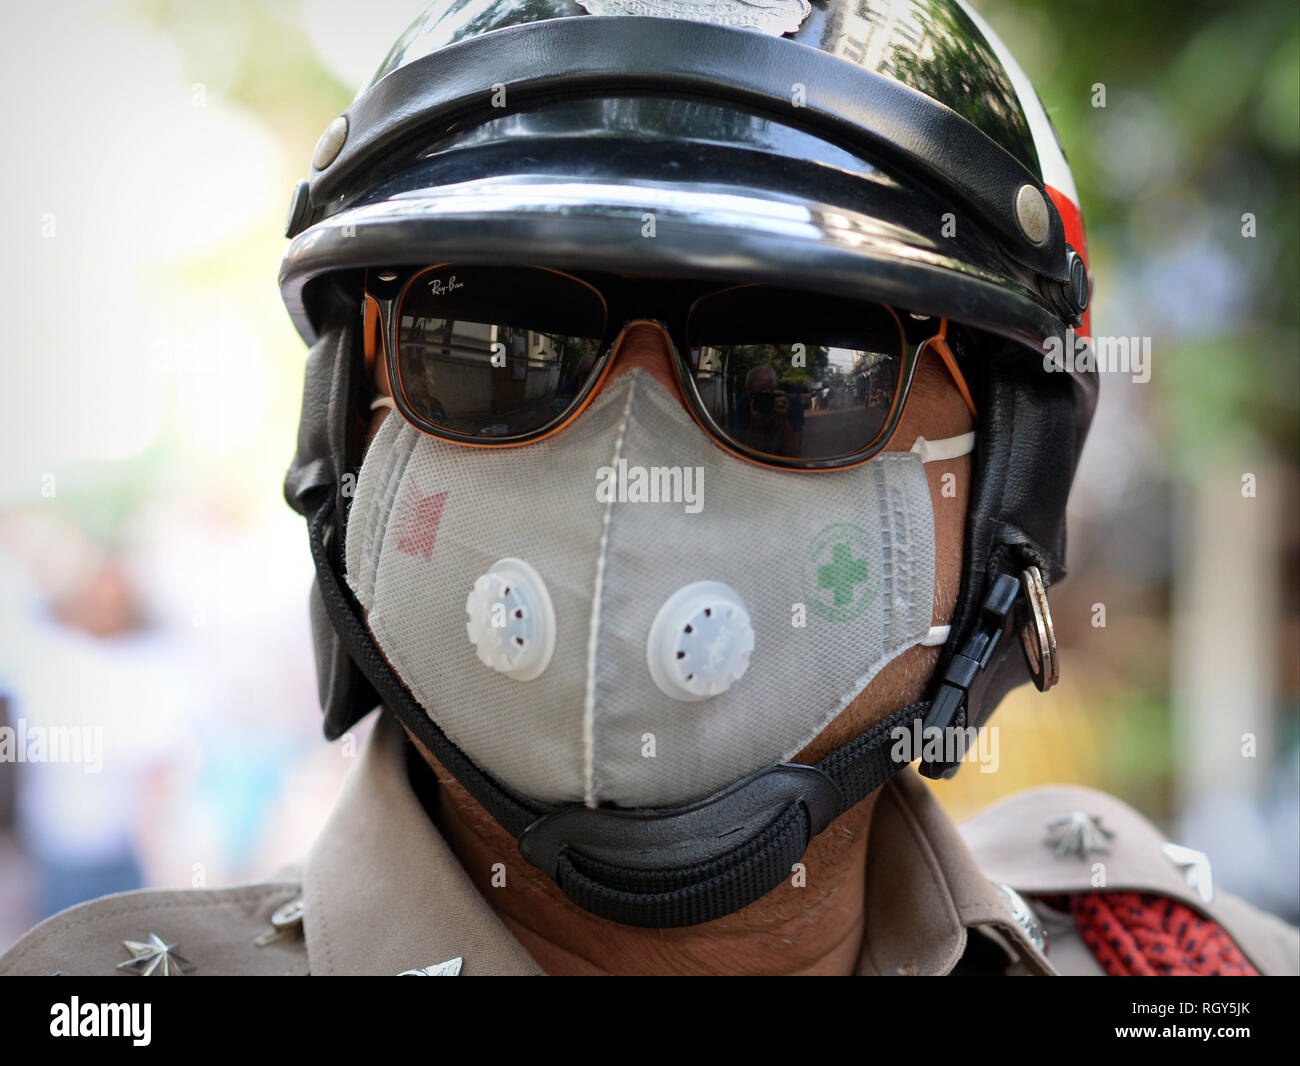 Royal Thai motorcycle police officer wears mirrored sunglasses and a protective face mask in polluted Bangkok. Stock Photo